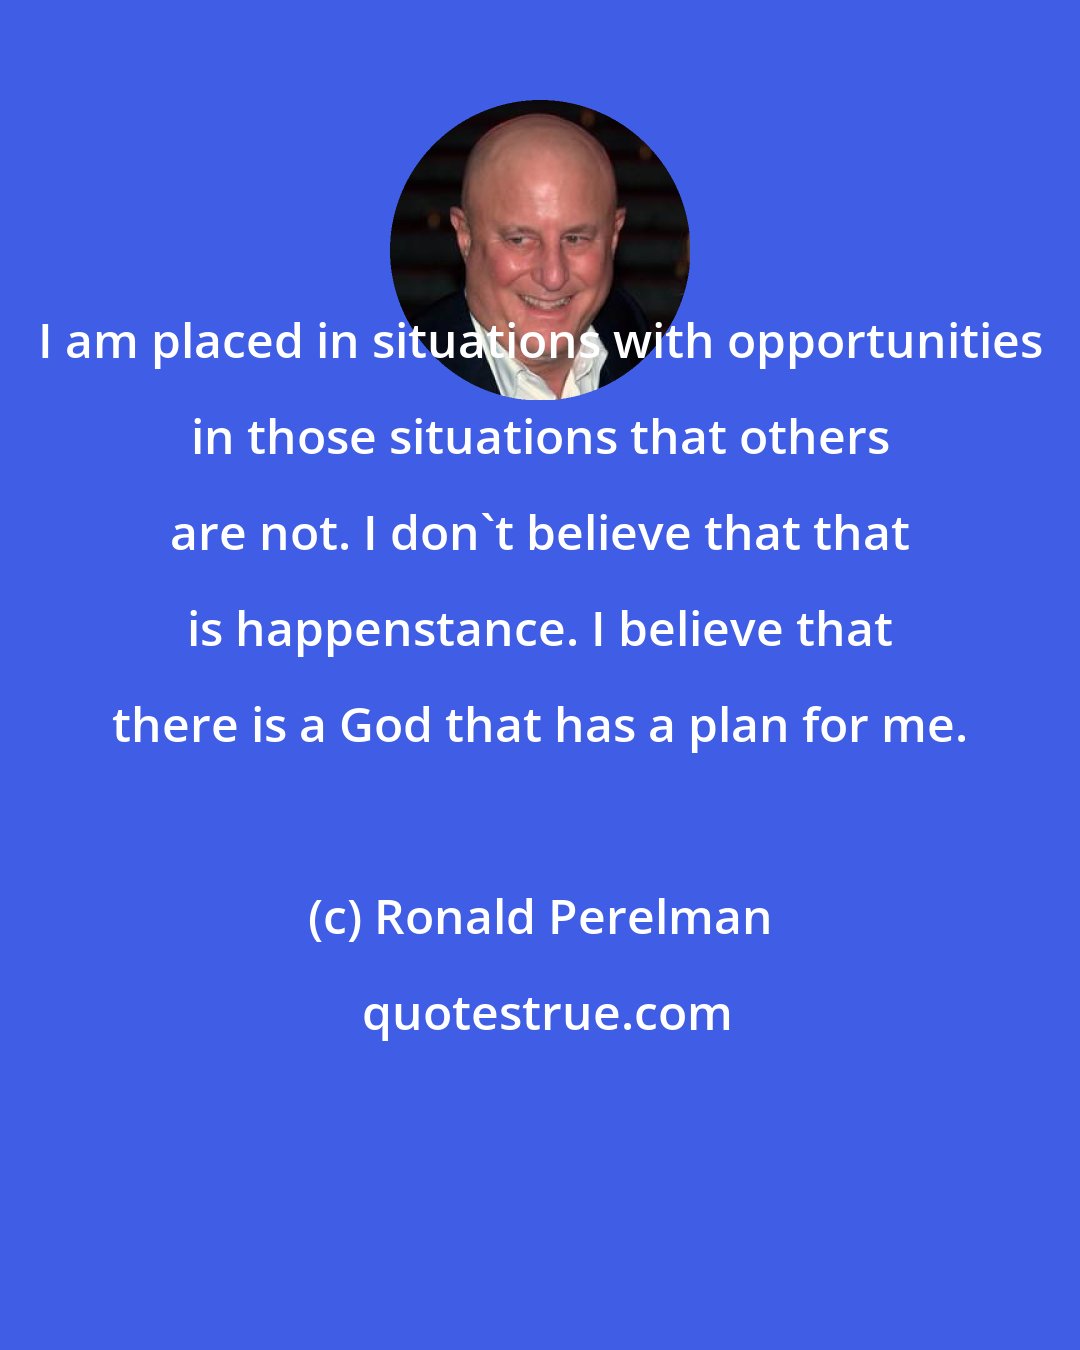 Ronald Perelman: I am placed in situations with opportunities in those situations that others are not. I don't believe that that is happenstance. I believe that there is a God that has a plan for me.